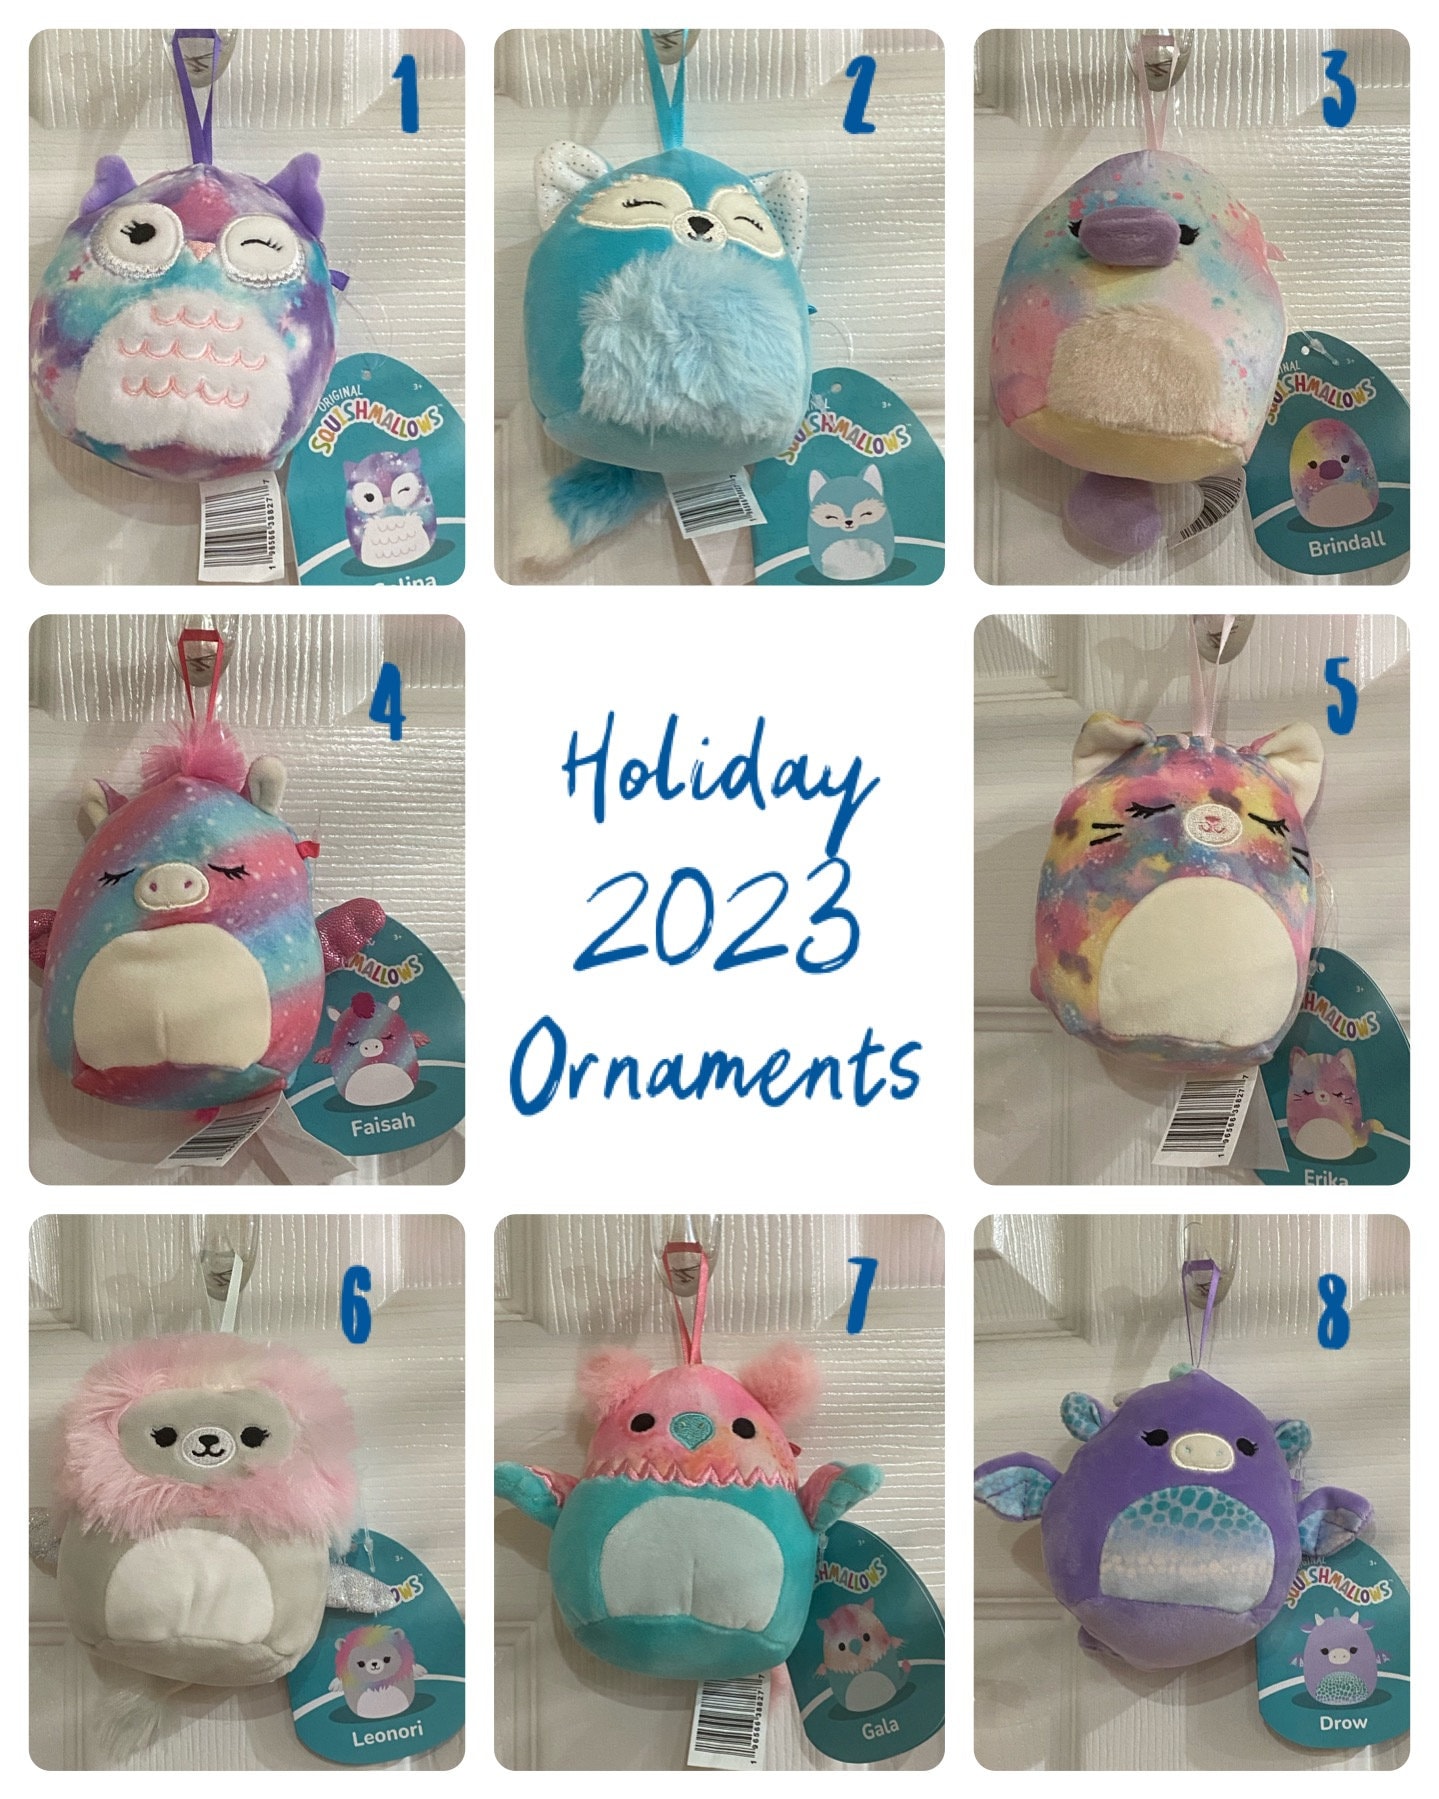 Squishmallow 4” Christmas 2022 Ornaments Set Of 6 Avery, Bubba